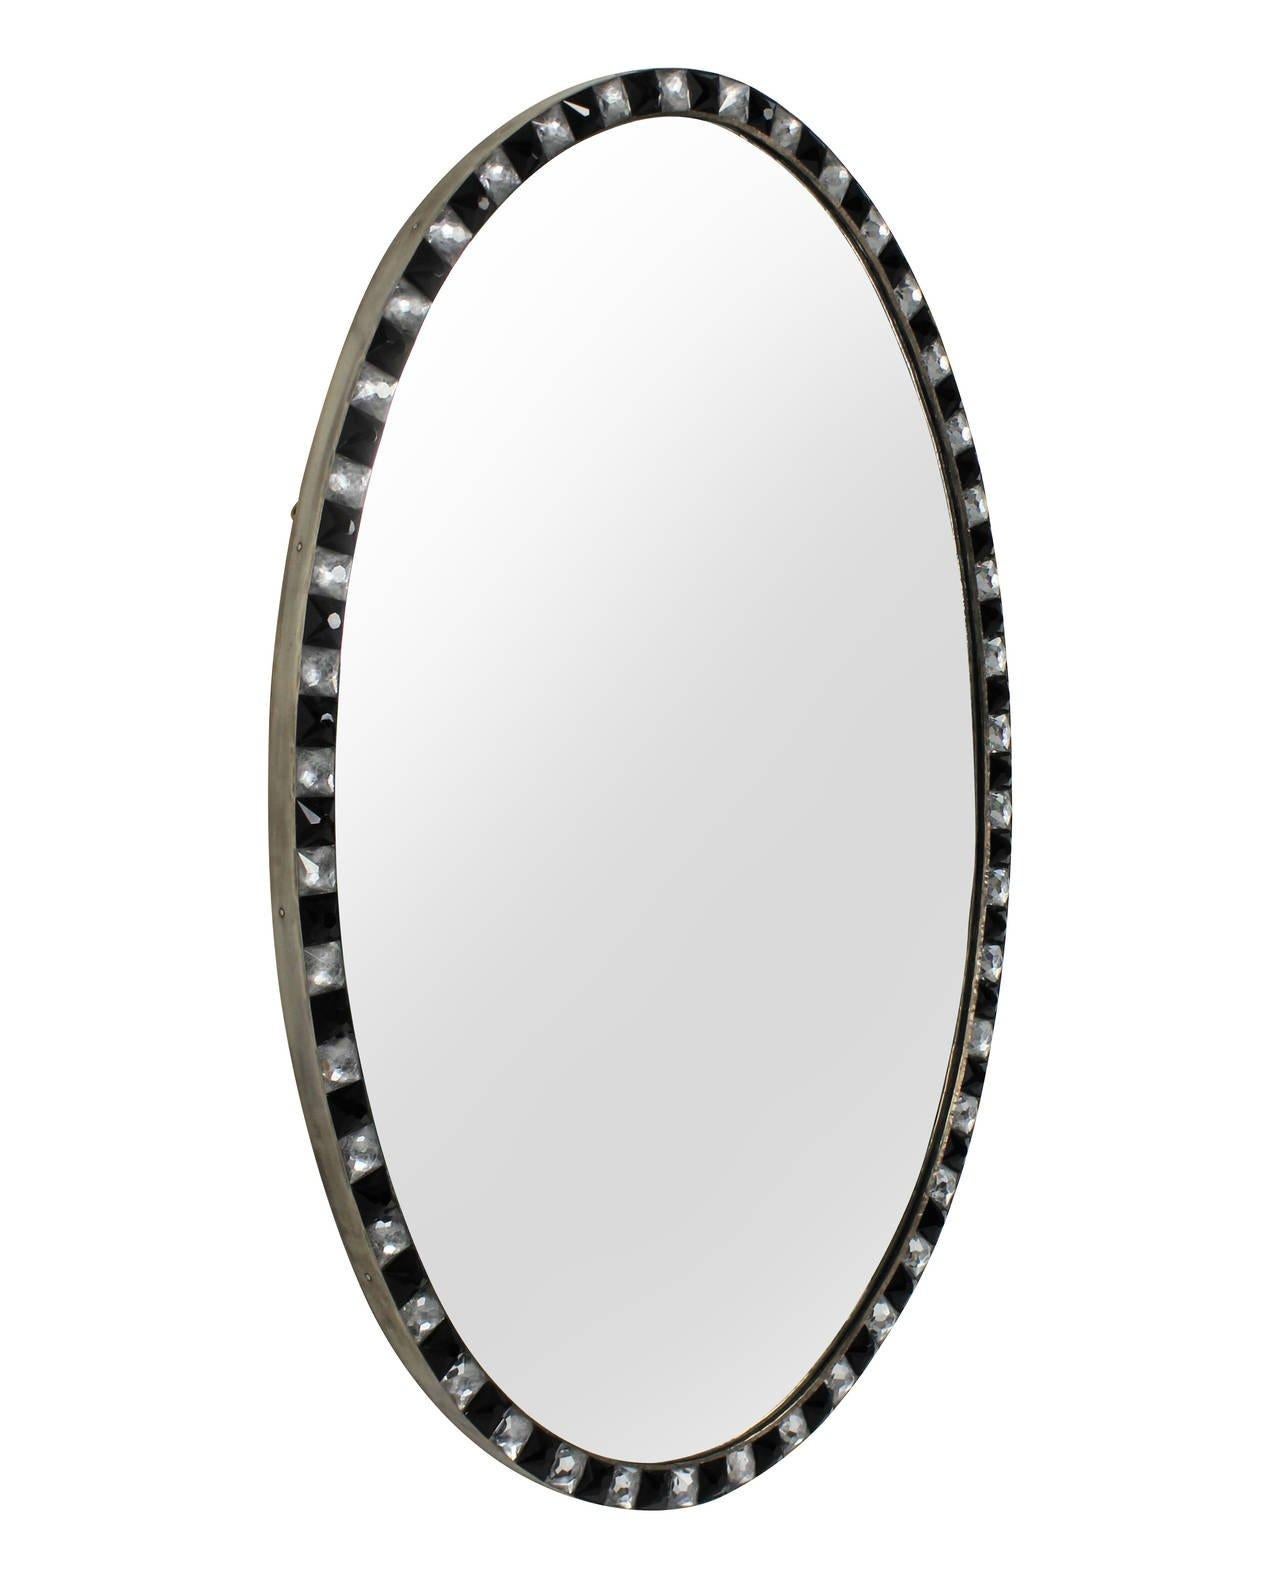 Contemporary Irish Mirror in the George lll Style